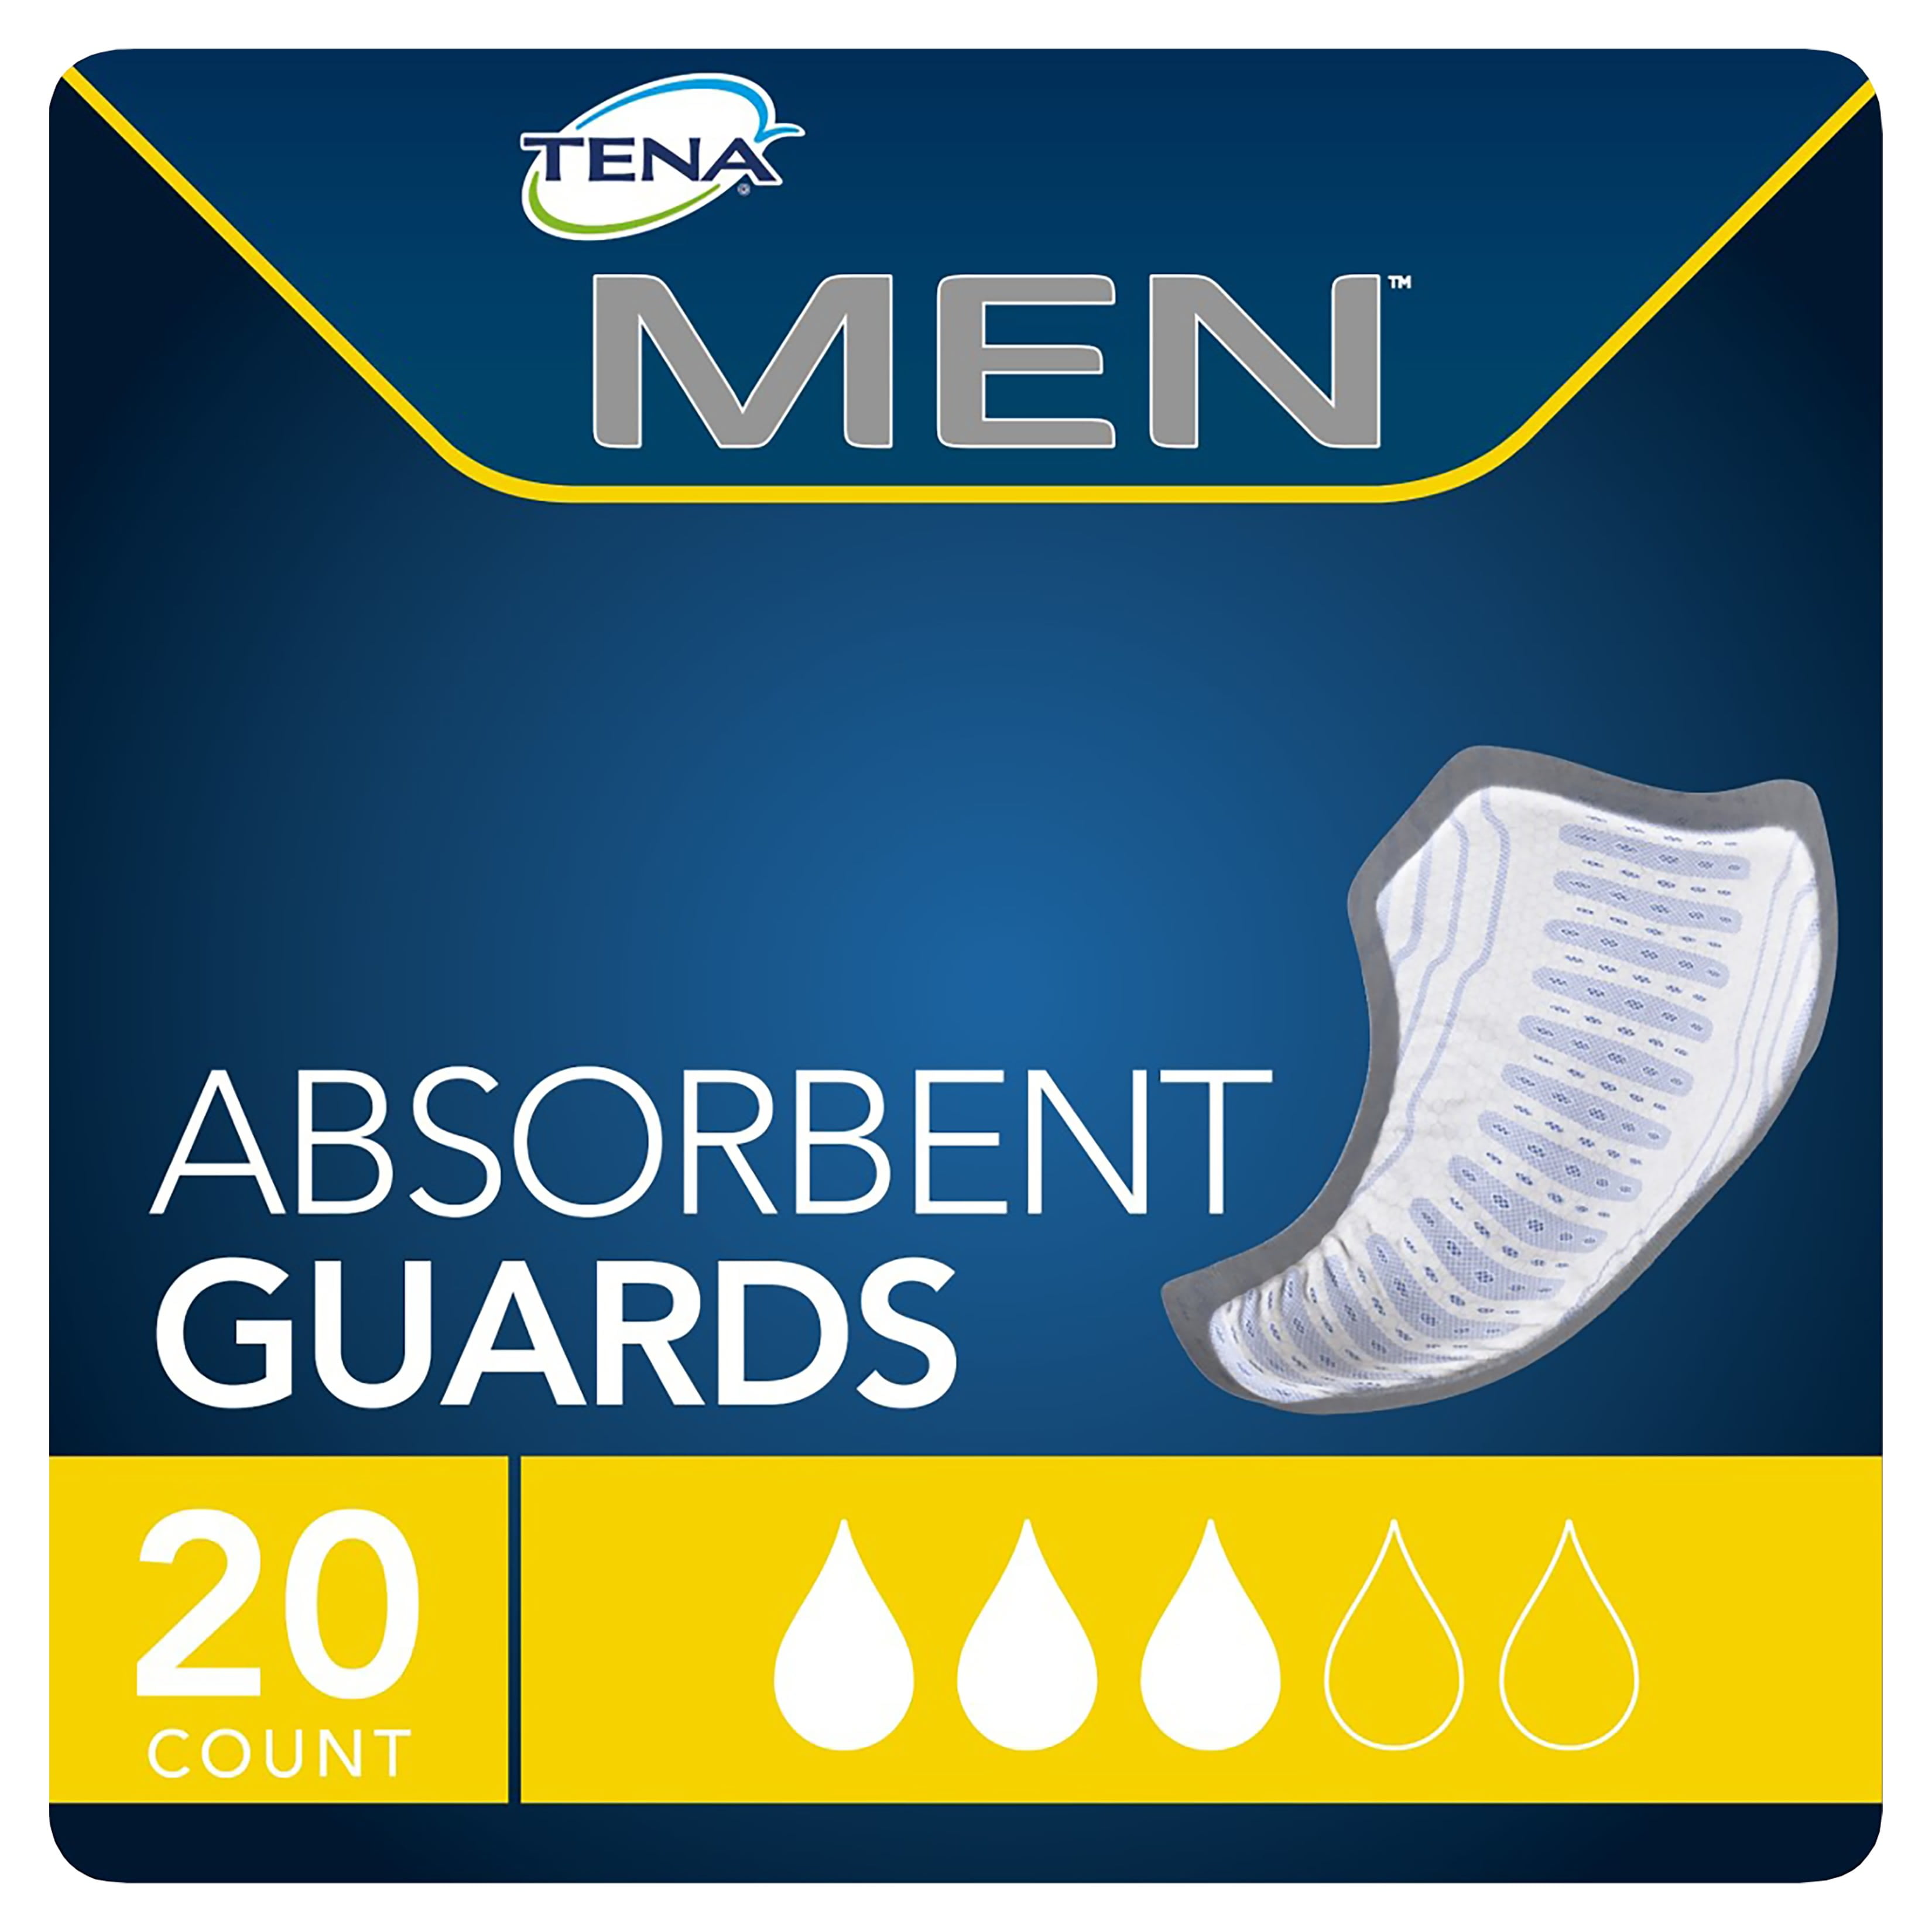 triomphant Influent journal intime tena mens pads level 4 Alcool ...